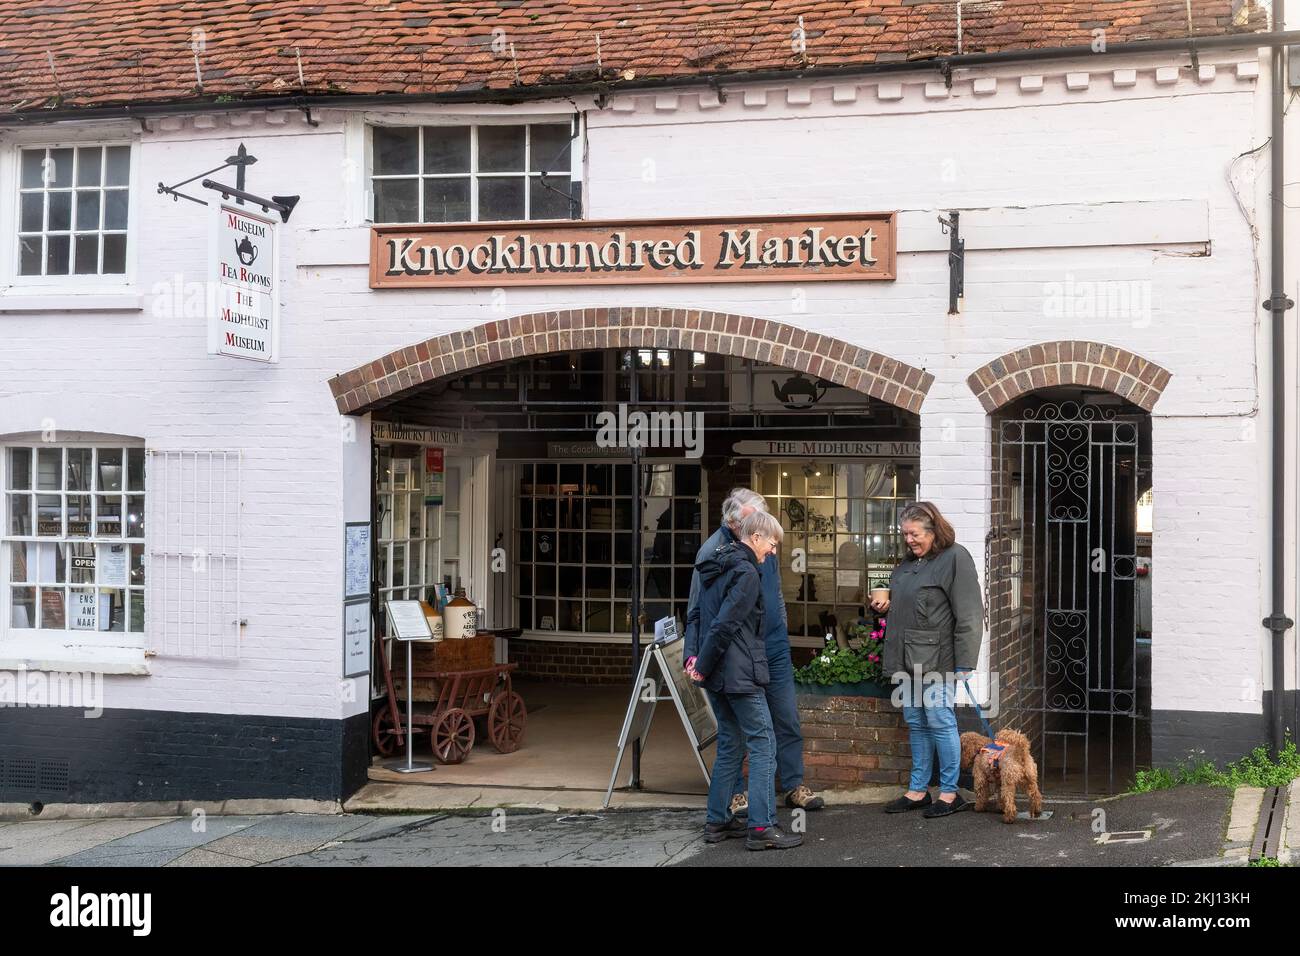 The Midhurst Museum and Tea Rooms in the former Knockhundred Market, a visitor attraction in Midhurst town centre, West Sussex, England, UK Stock Photo